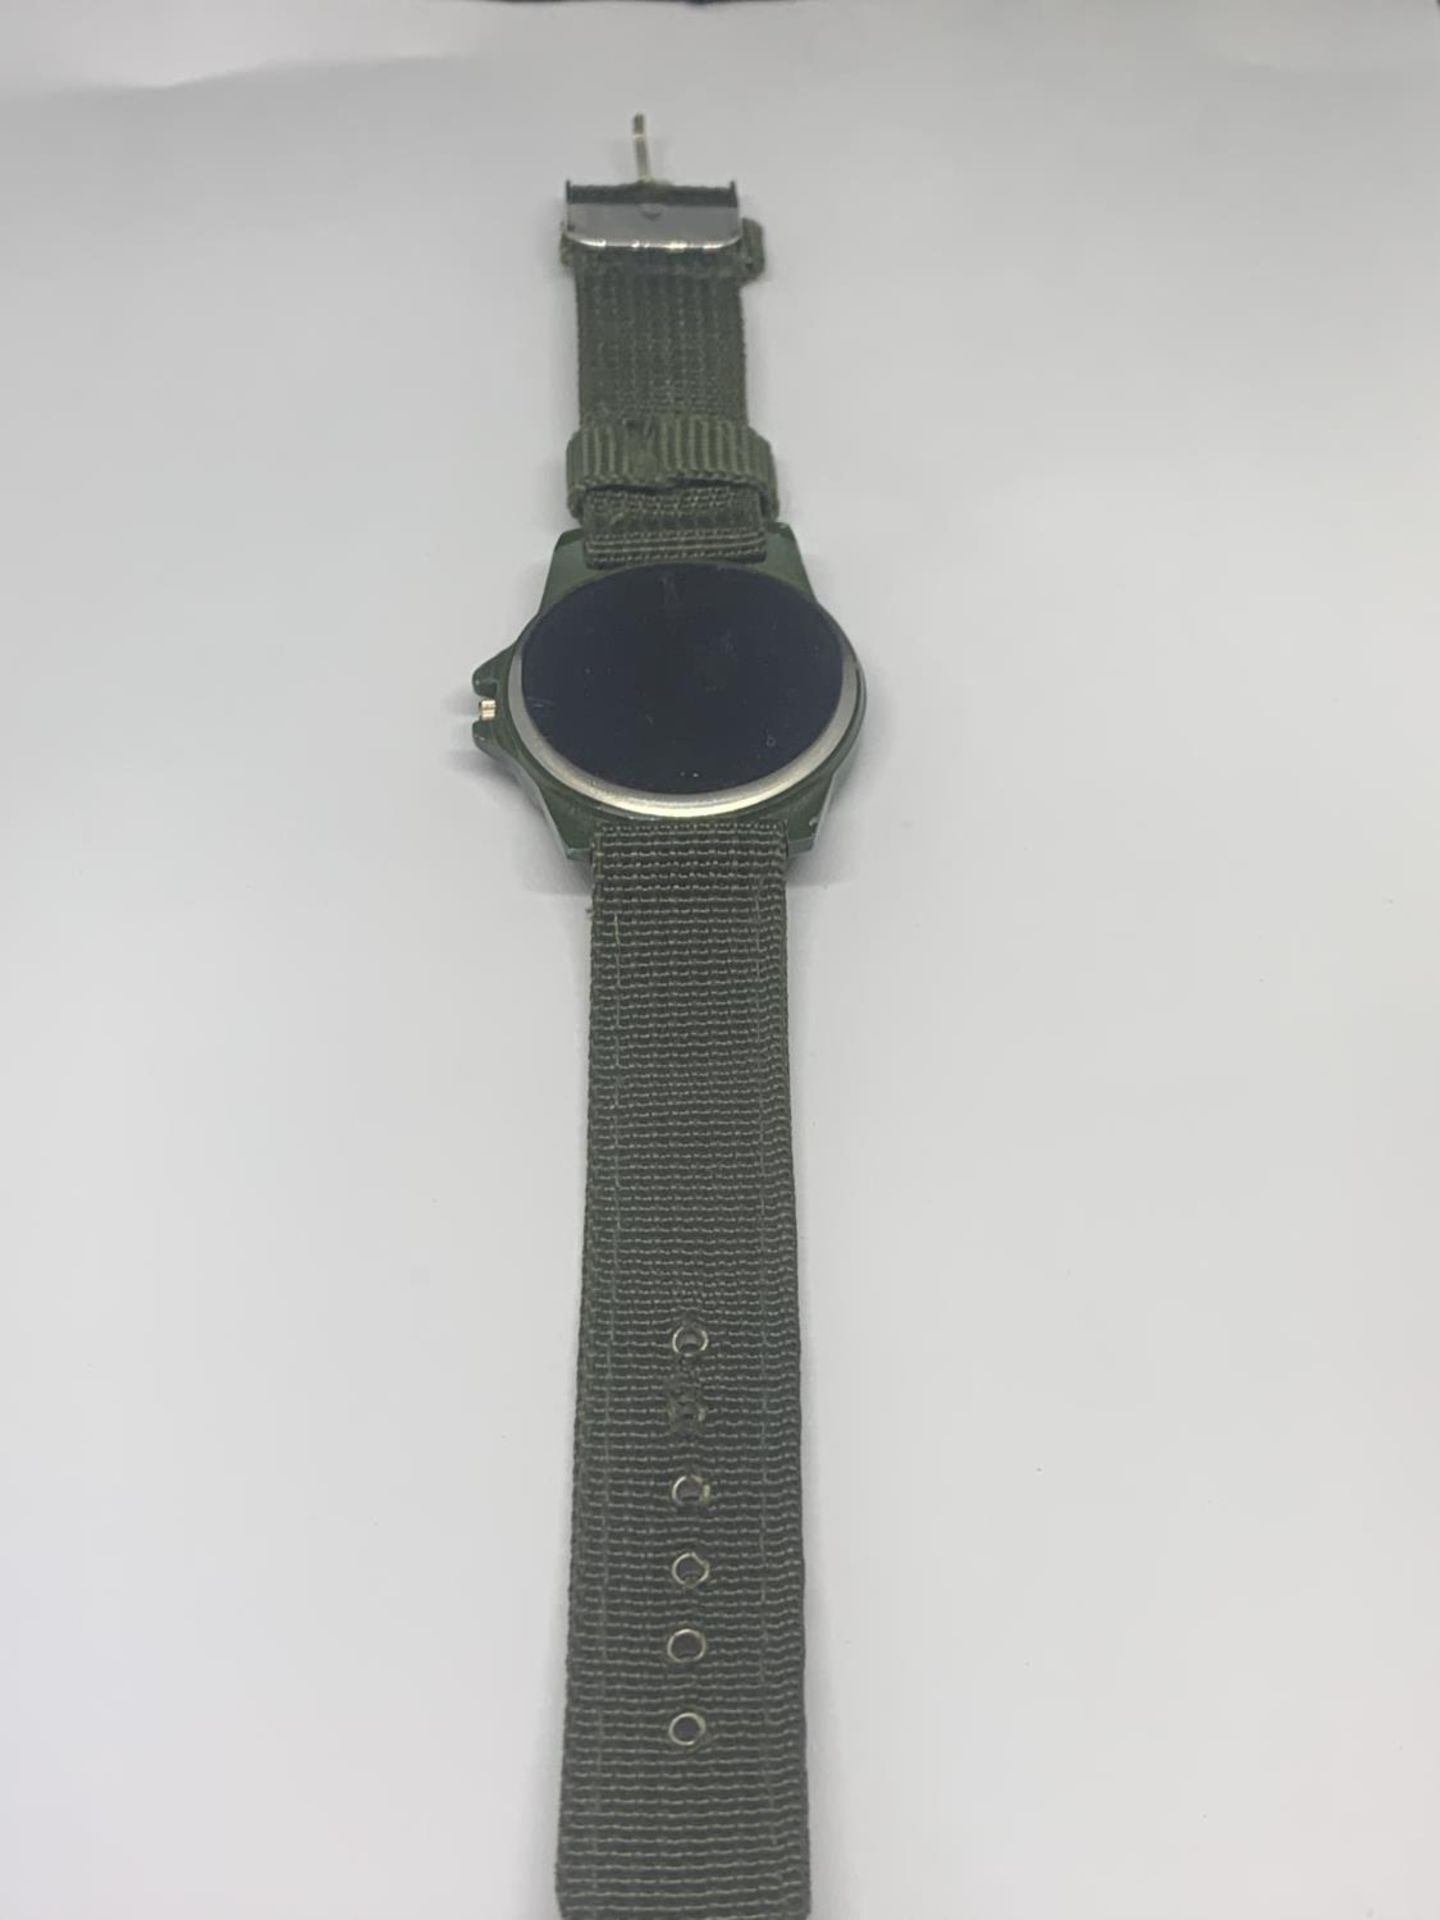 A SWISS ARMY WRISTWATCH WITH GREEN CANVAS STRAP SEEN WORKING BUT NO WARRANTY - Image 3 of 3